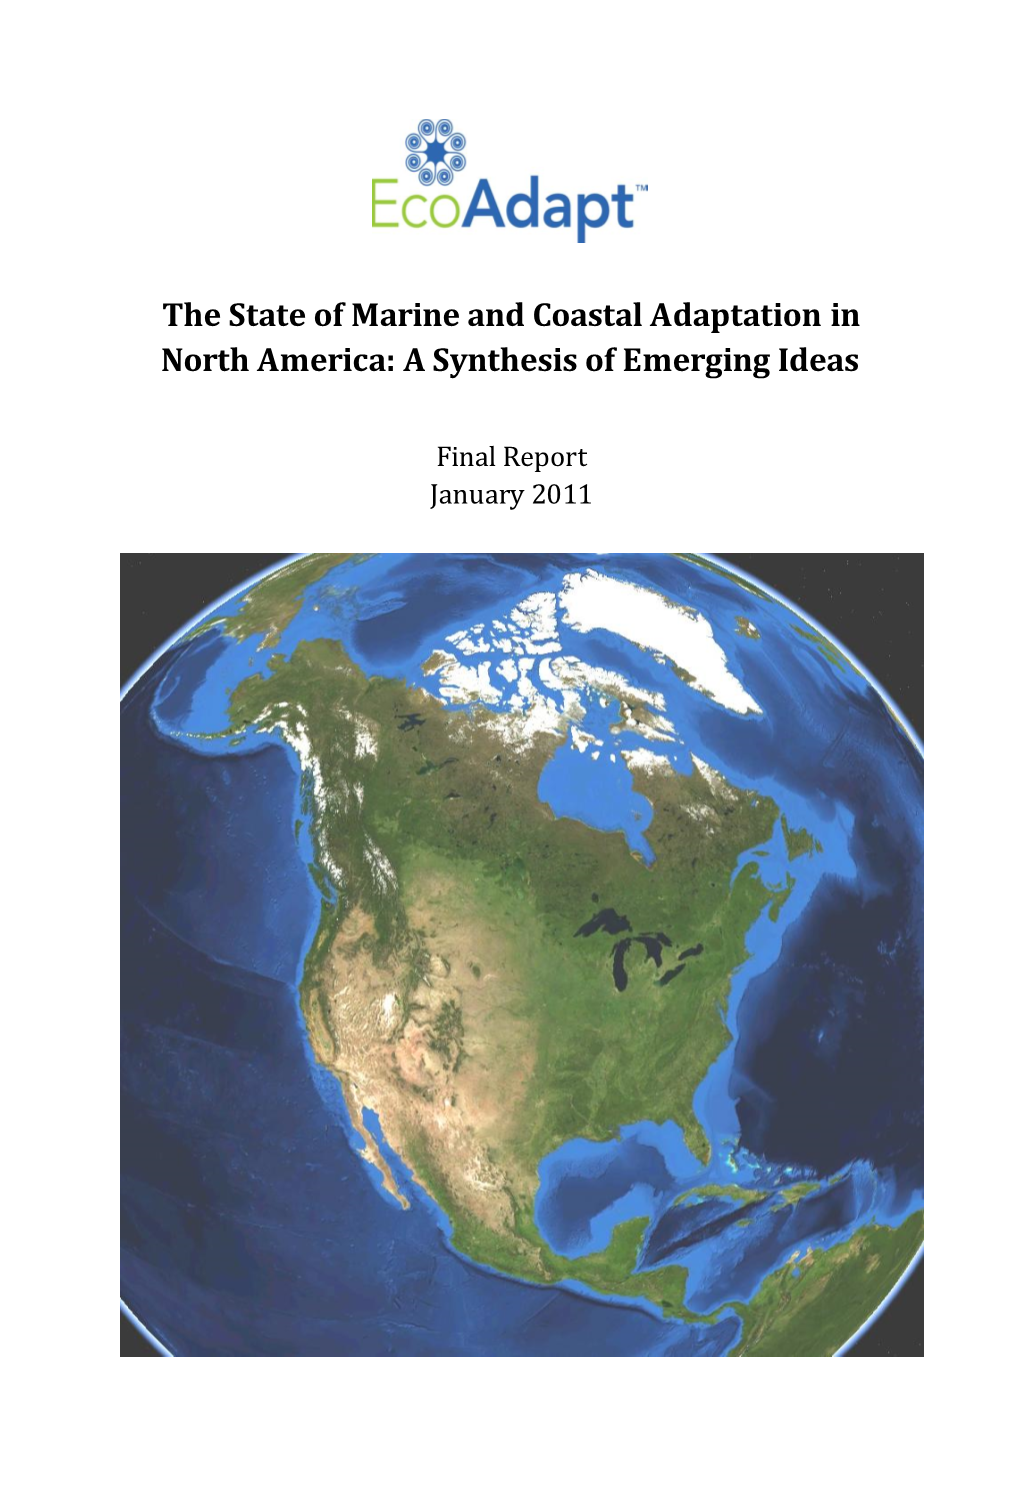 The State of Marine and Coastal Adaptation in North America: a Synthesis of Emerging Ideas